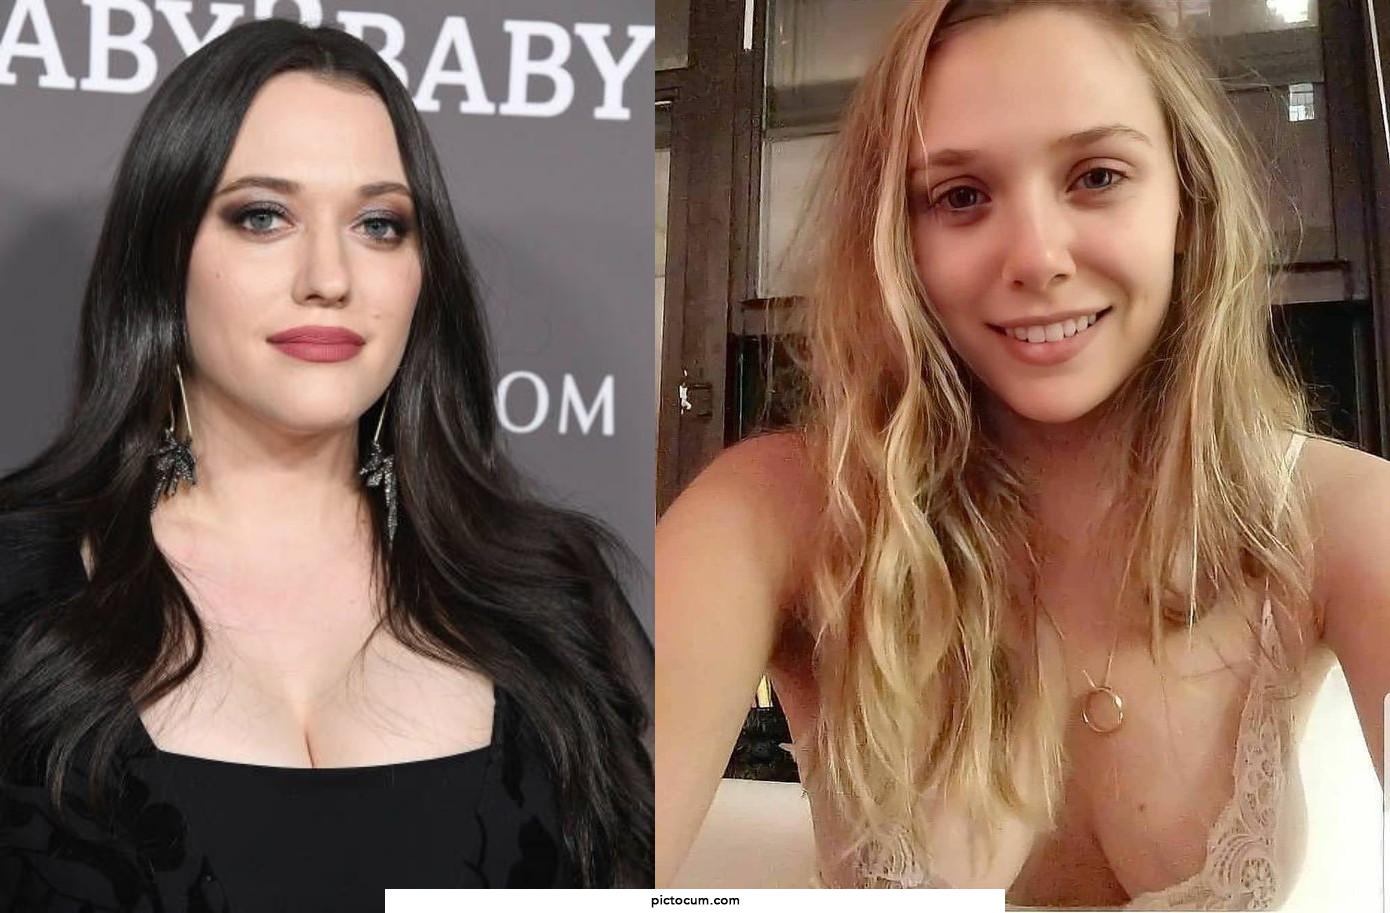 Which set of titties do you want to fuck, Kat's or Lizzie's?